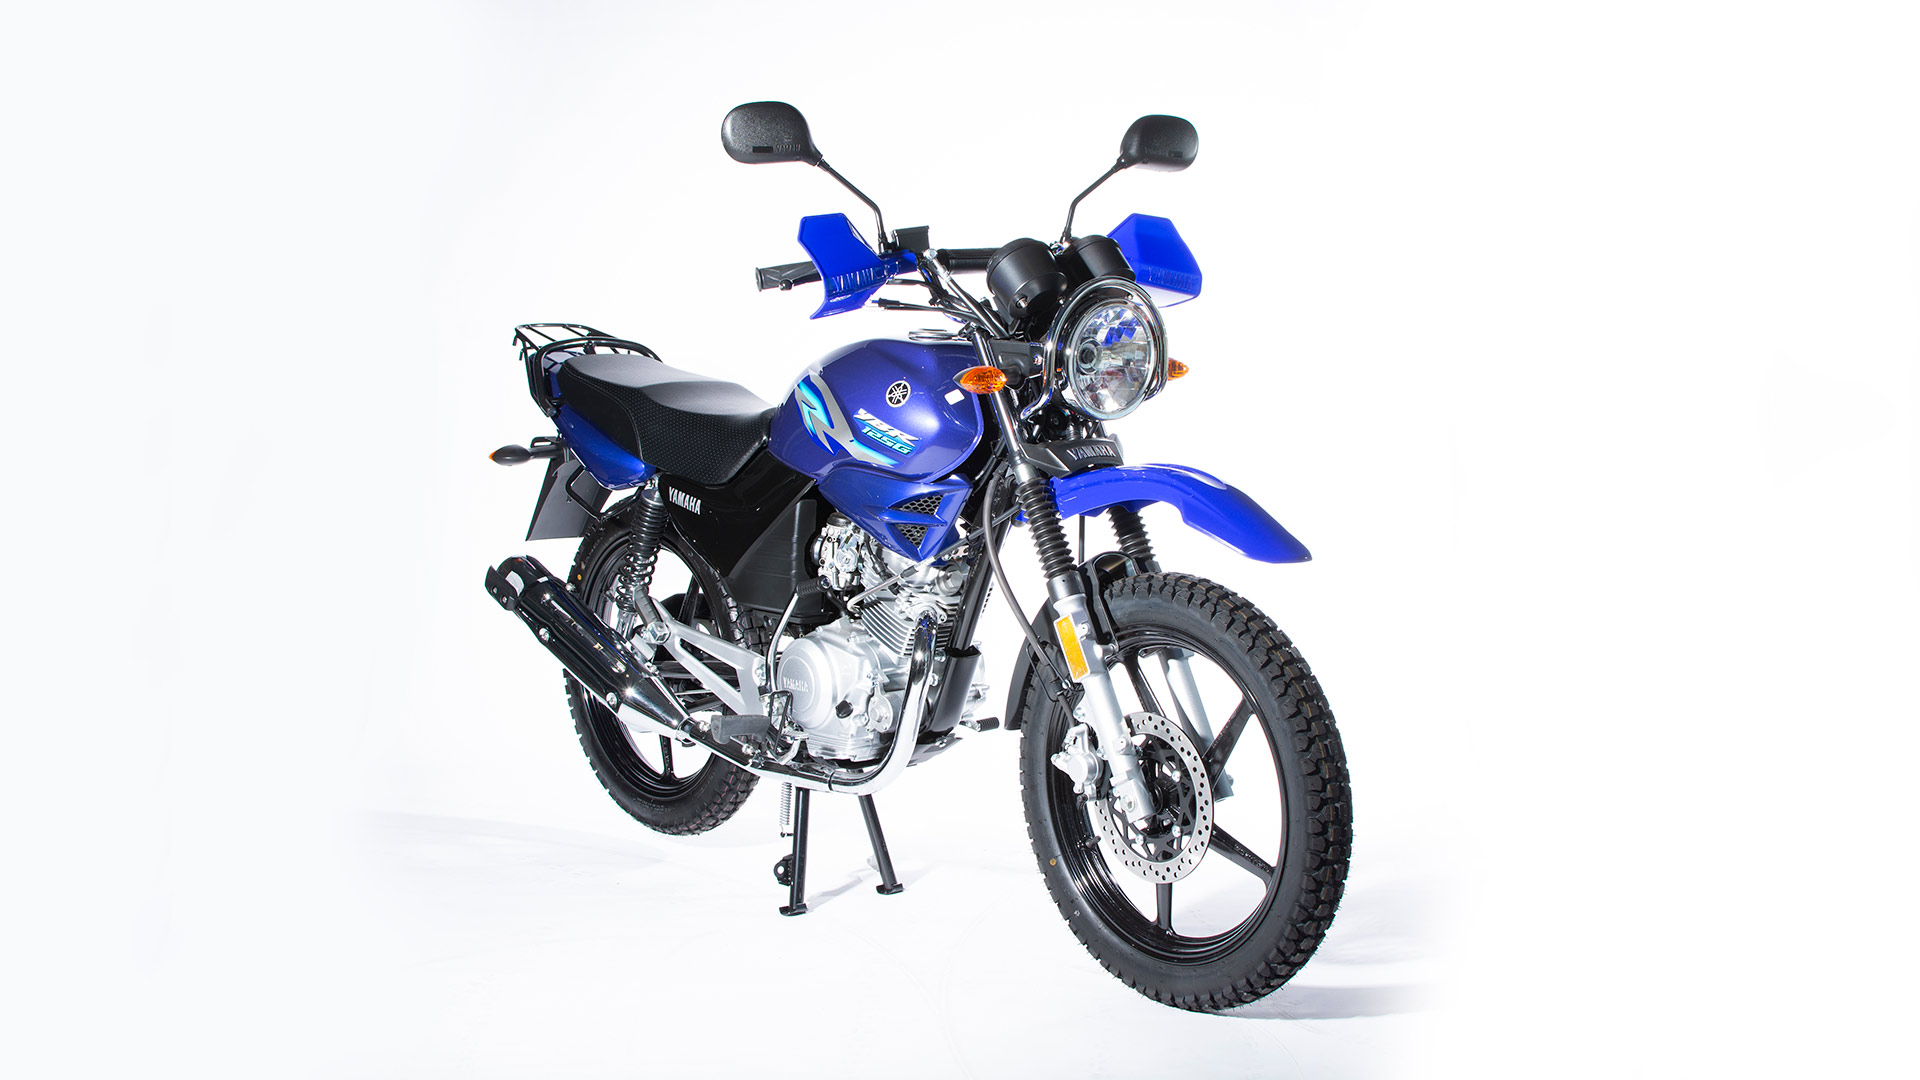 YAMAHA YBR125G - THIS WAY, EVEN RUSH HOUR’S FUN:
Eager to please, this punchy 4-stroke will happily propel you around city streets with its smooth five-speed gearbox. Built for easy-going performance and reliability, the YBR125 won’t let you down.